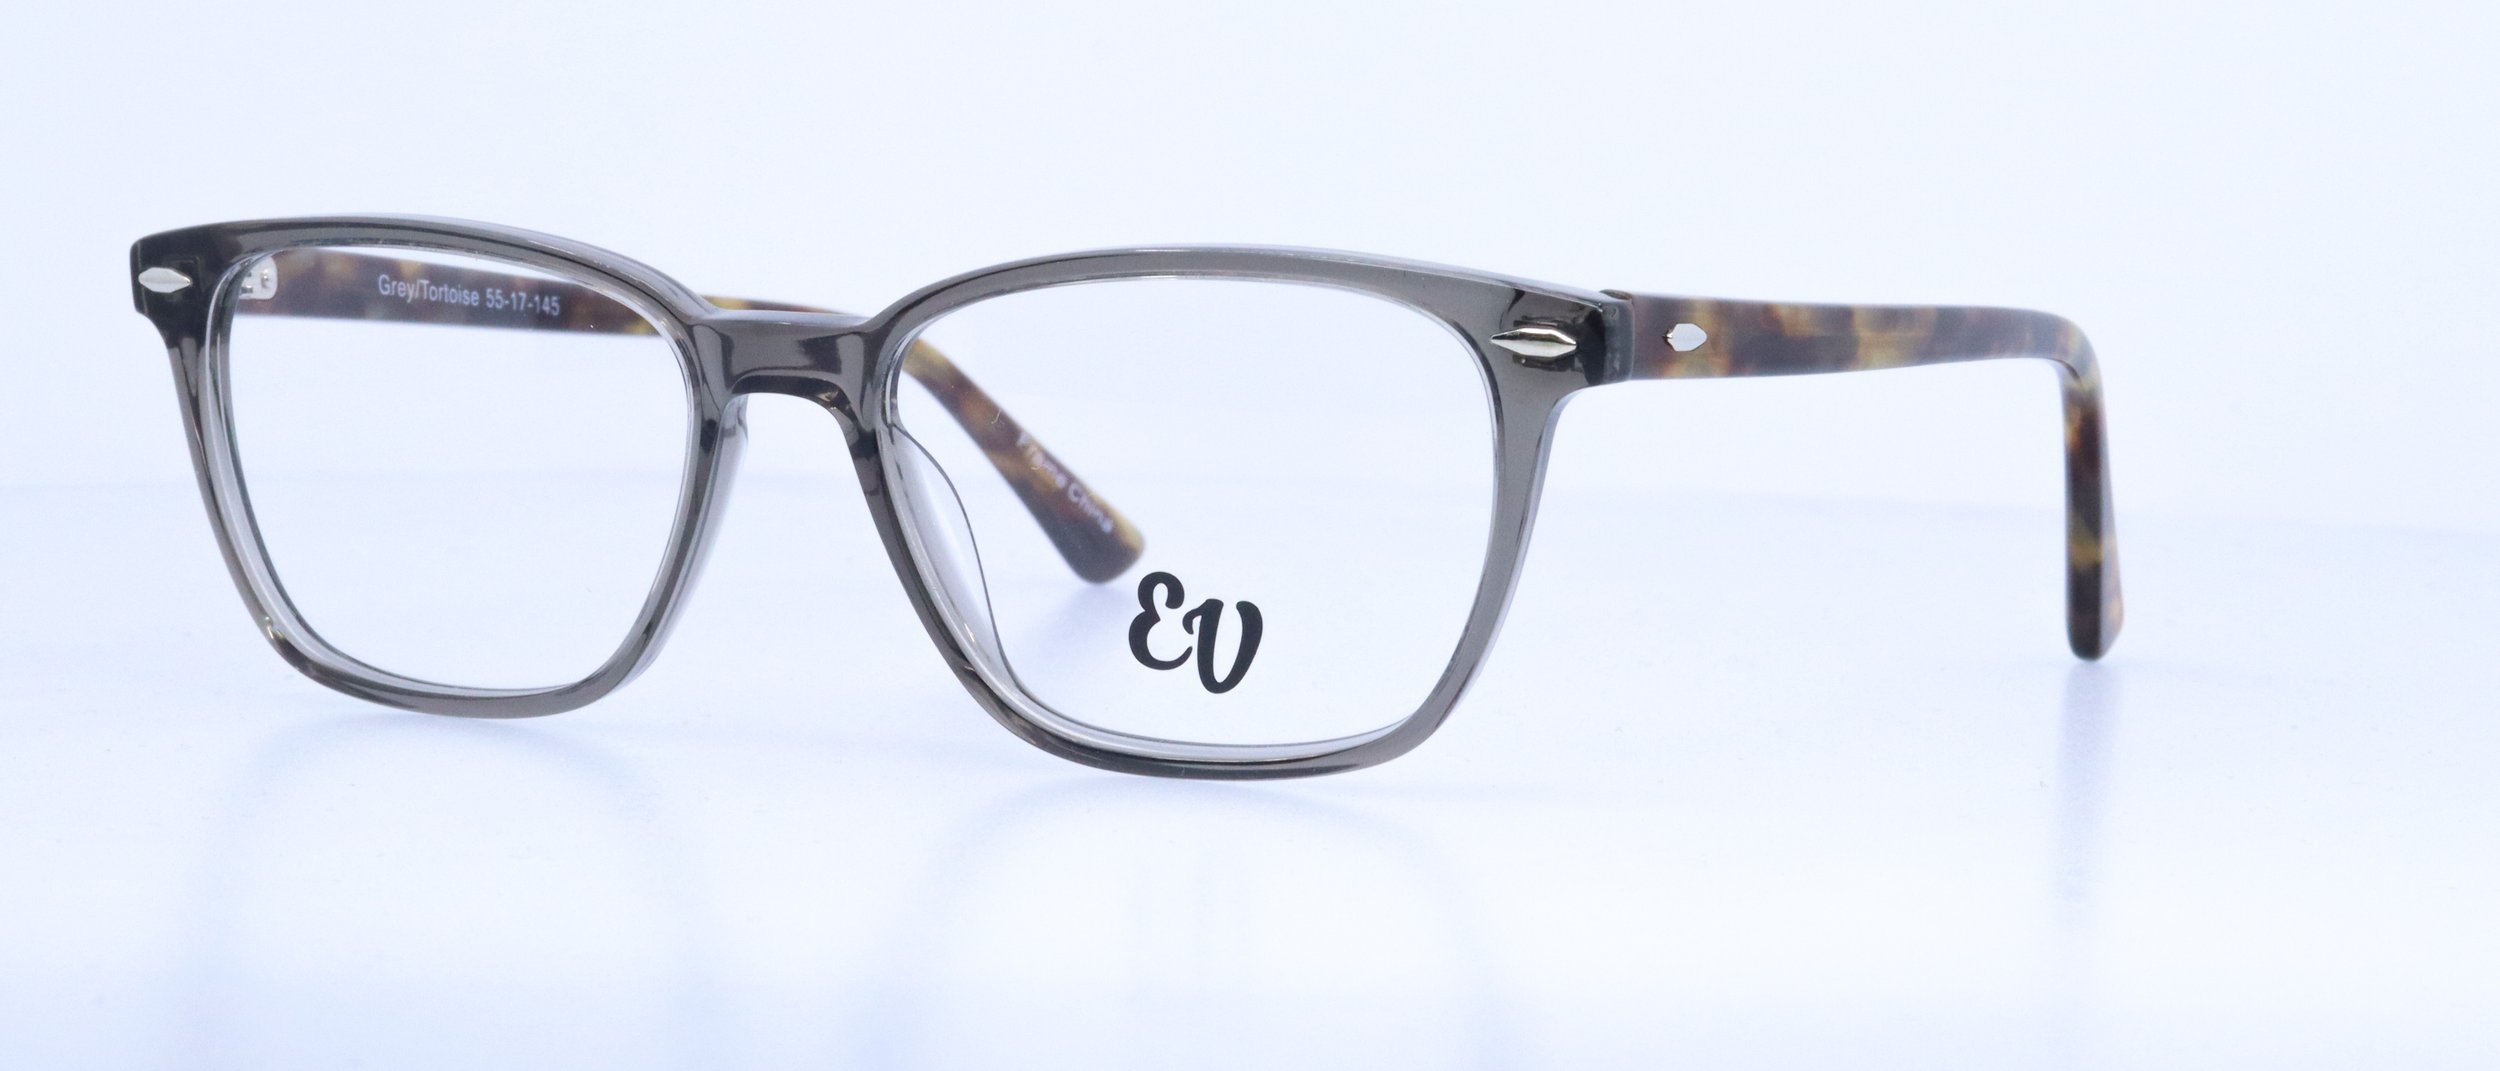  NEW!!! EV405: 55-17-145, Available in Black or Grey/Tortoise 